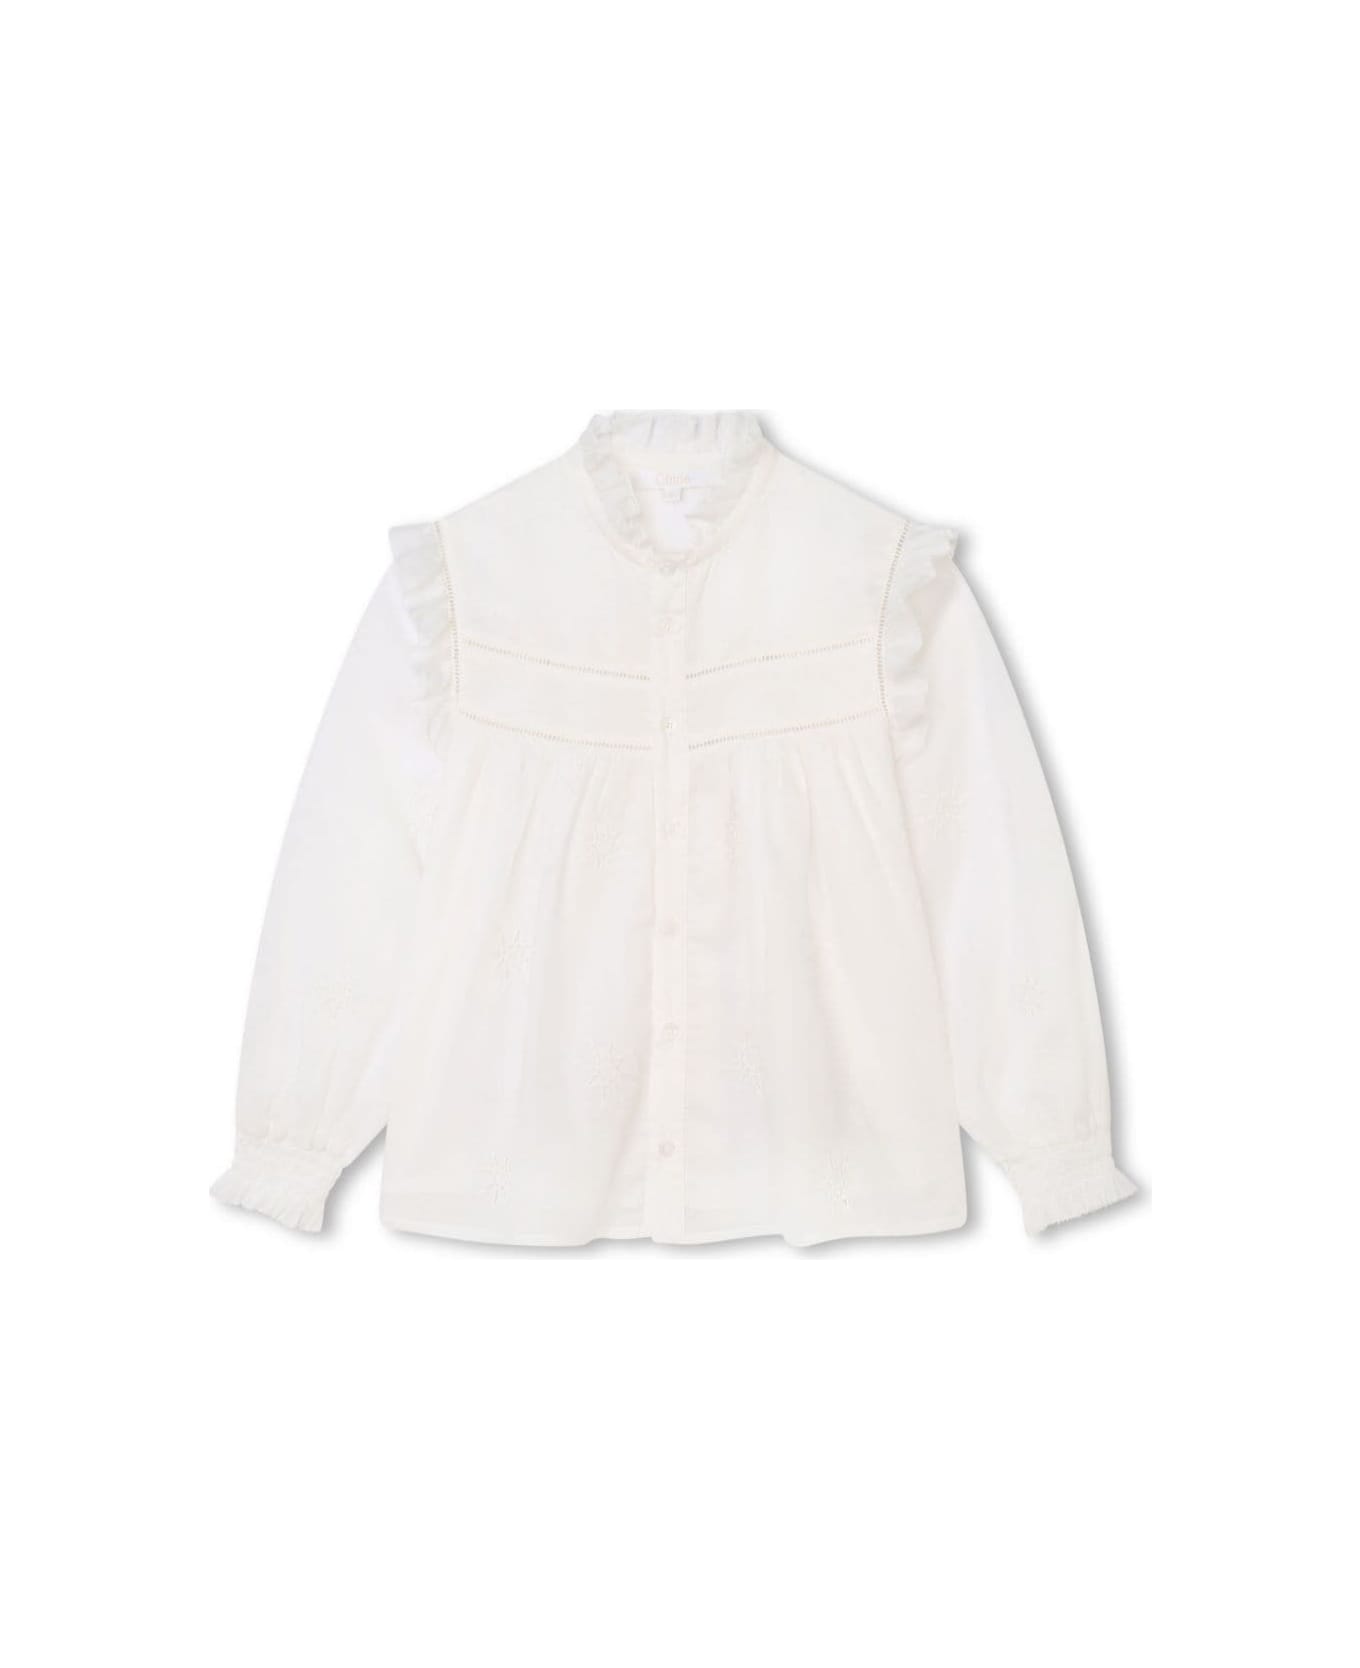 Chloé White Shirt With Stand Up Collar In Cotton Girl - White シャツ